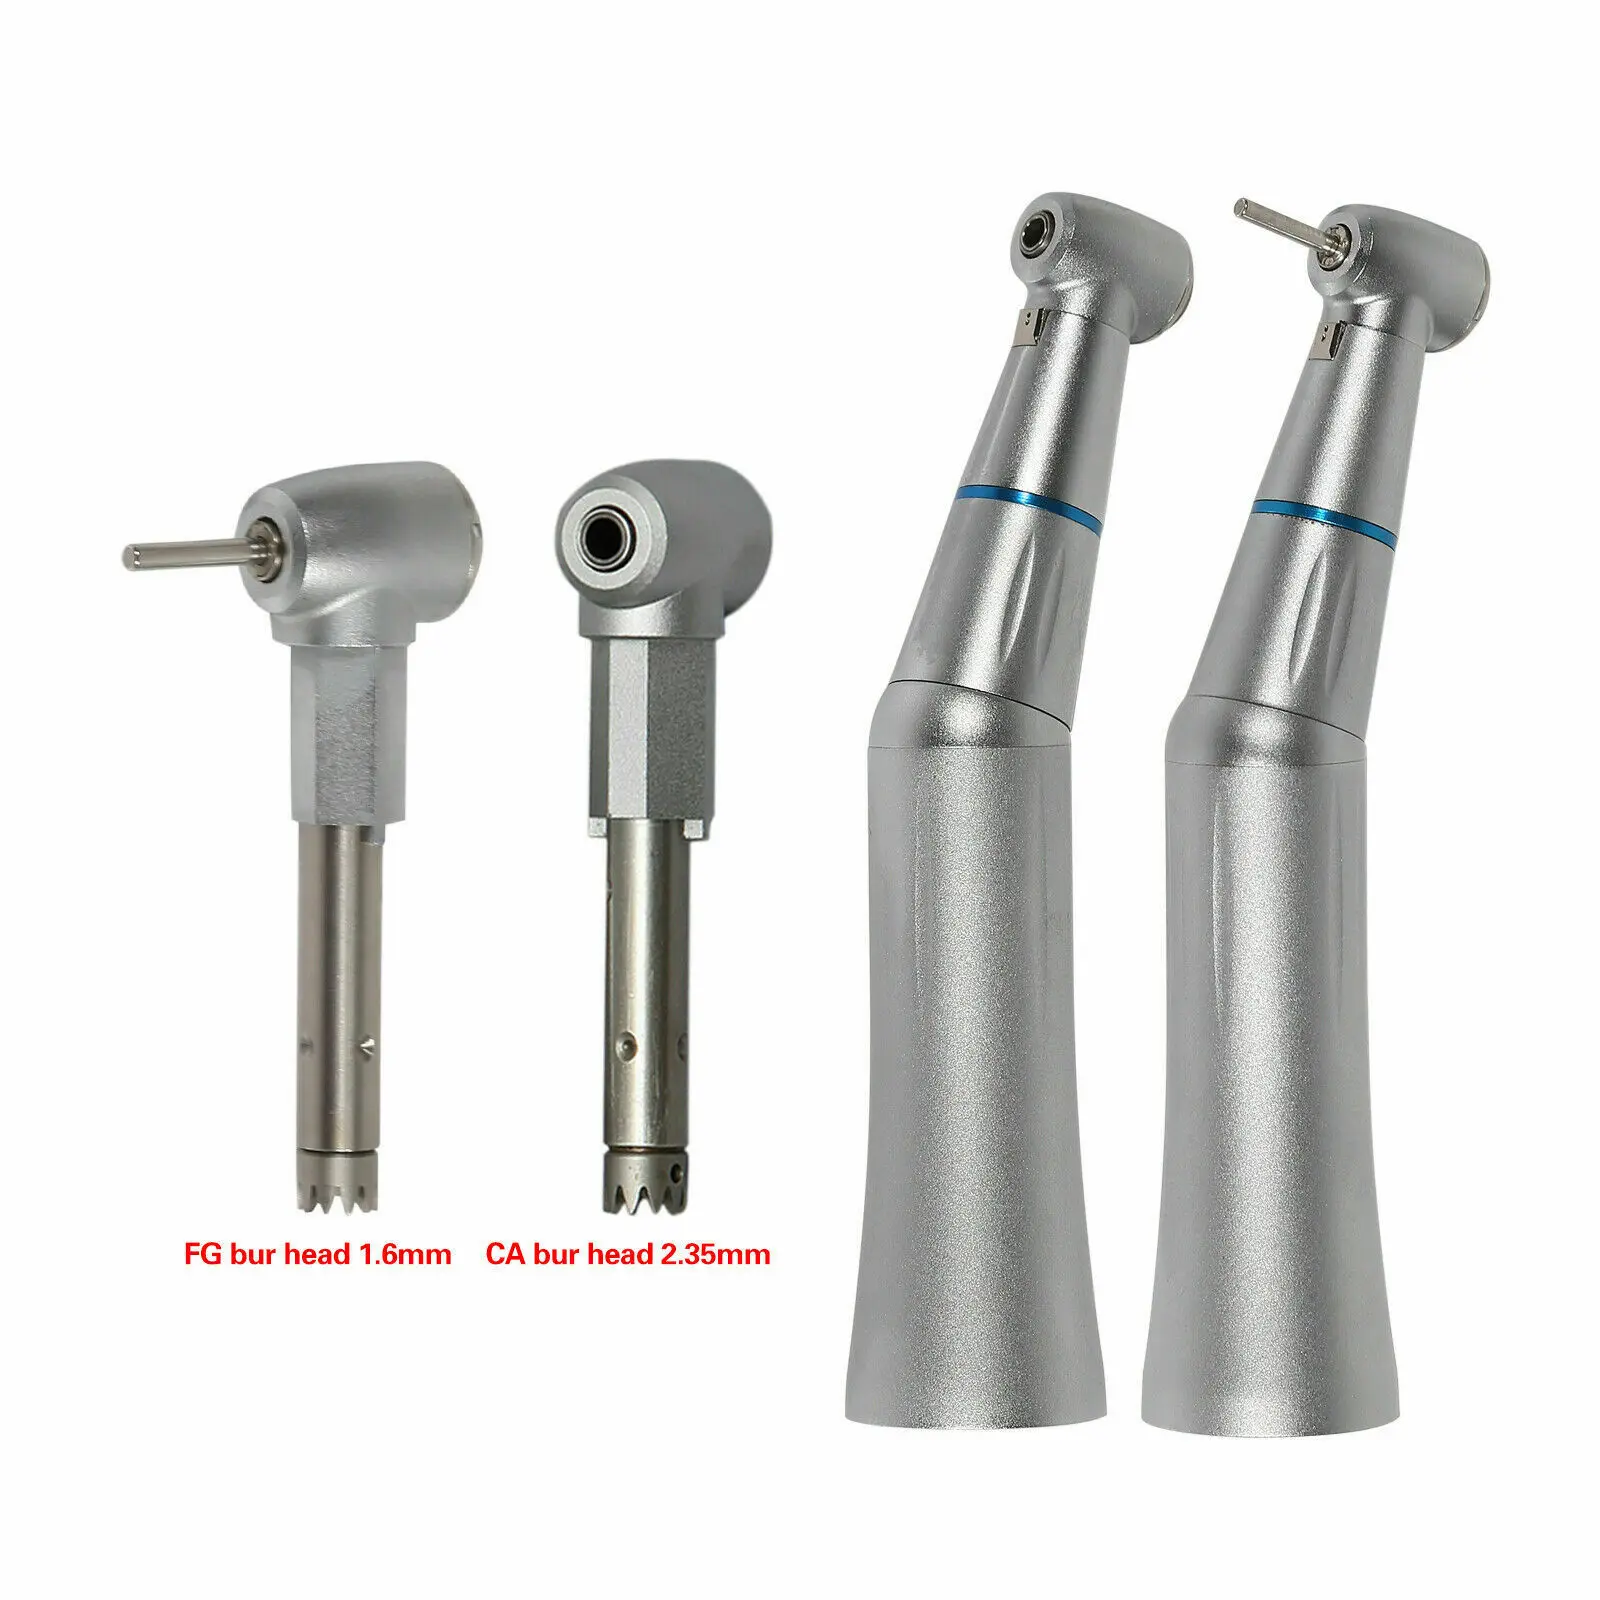 

Dental Inner Water Spary Slow Low Speed Contra Angle Handpiece Push Button 2.35mm/1.6mm Burs fit Kavo Nsk